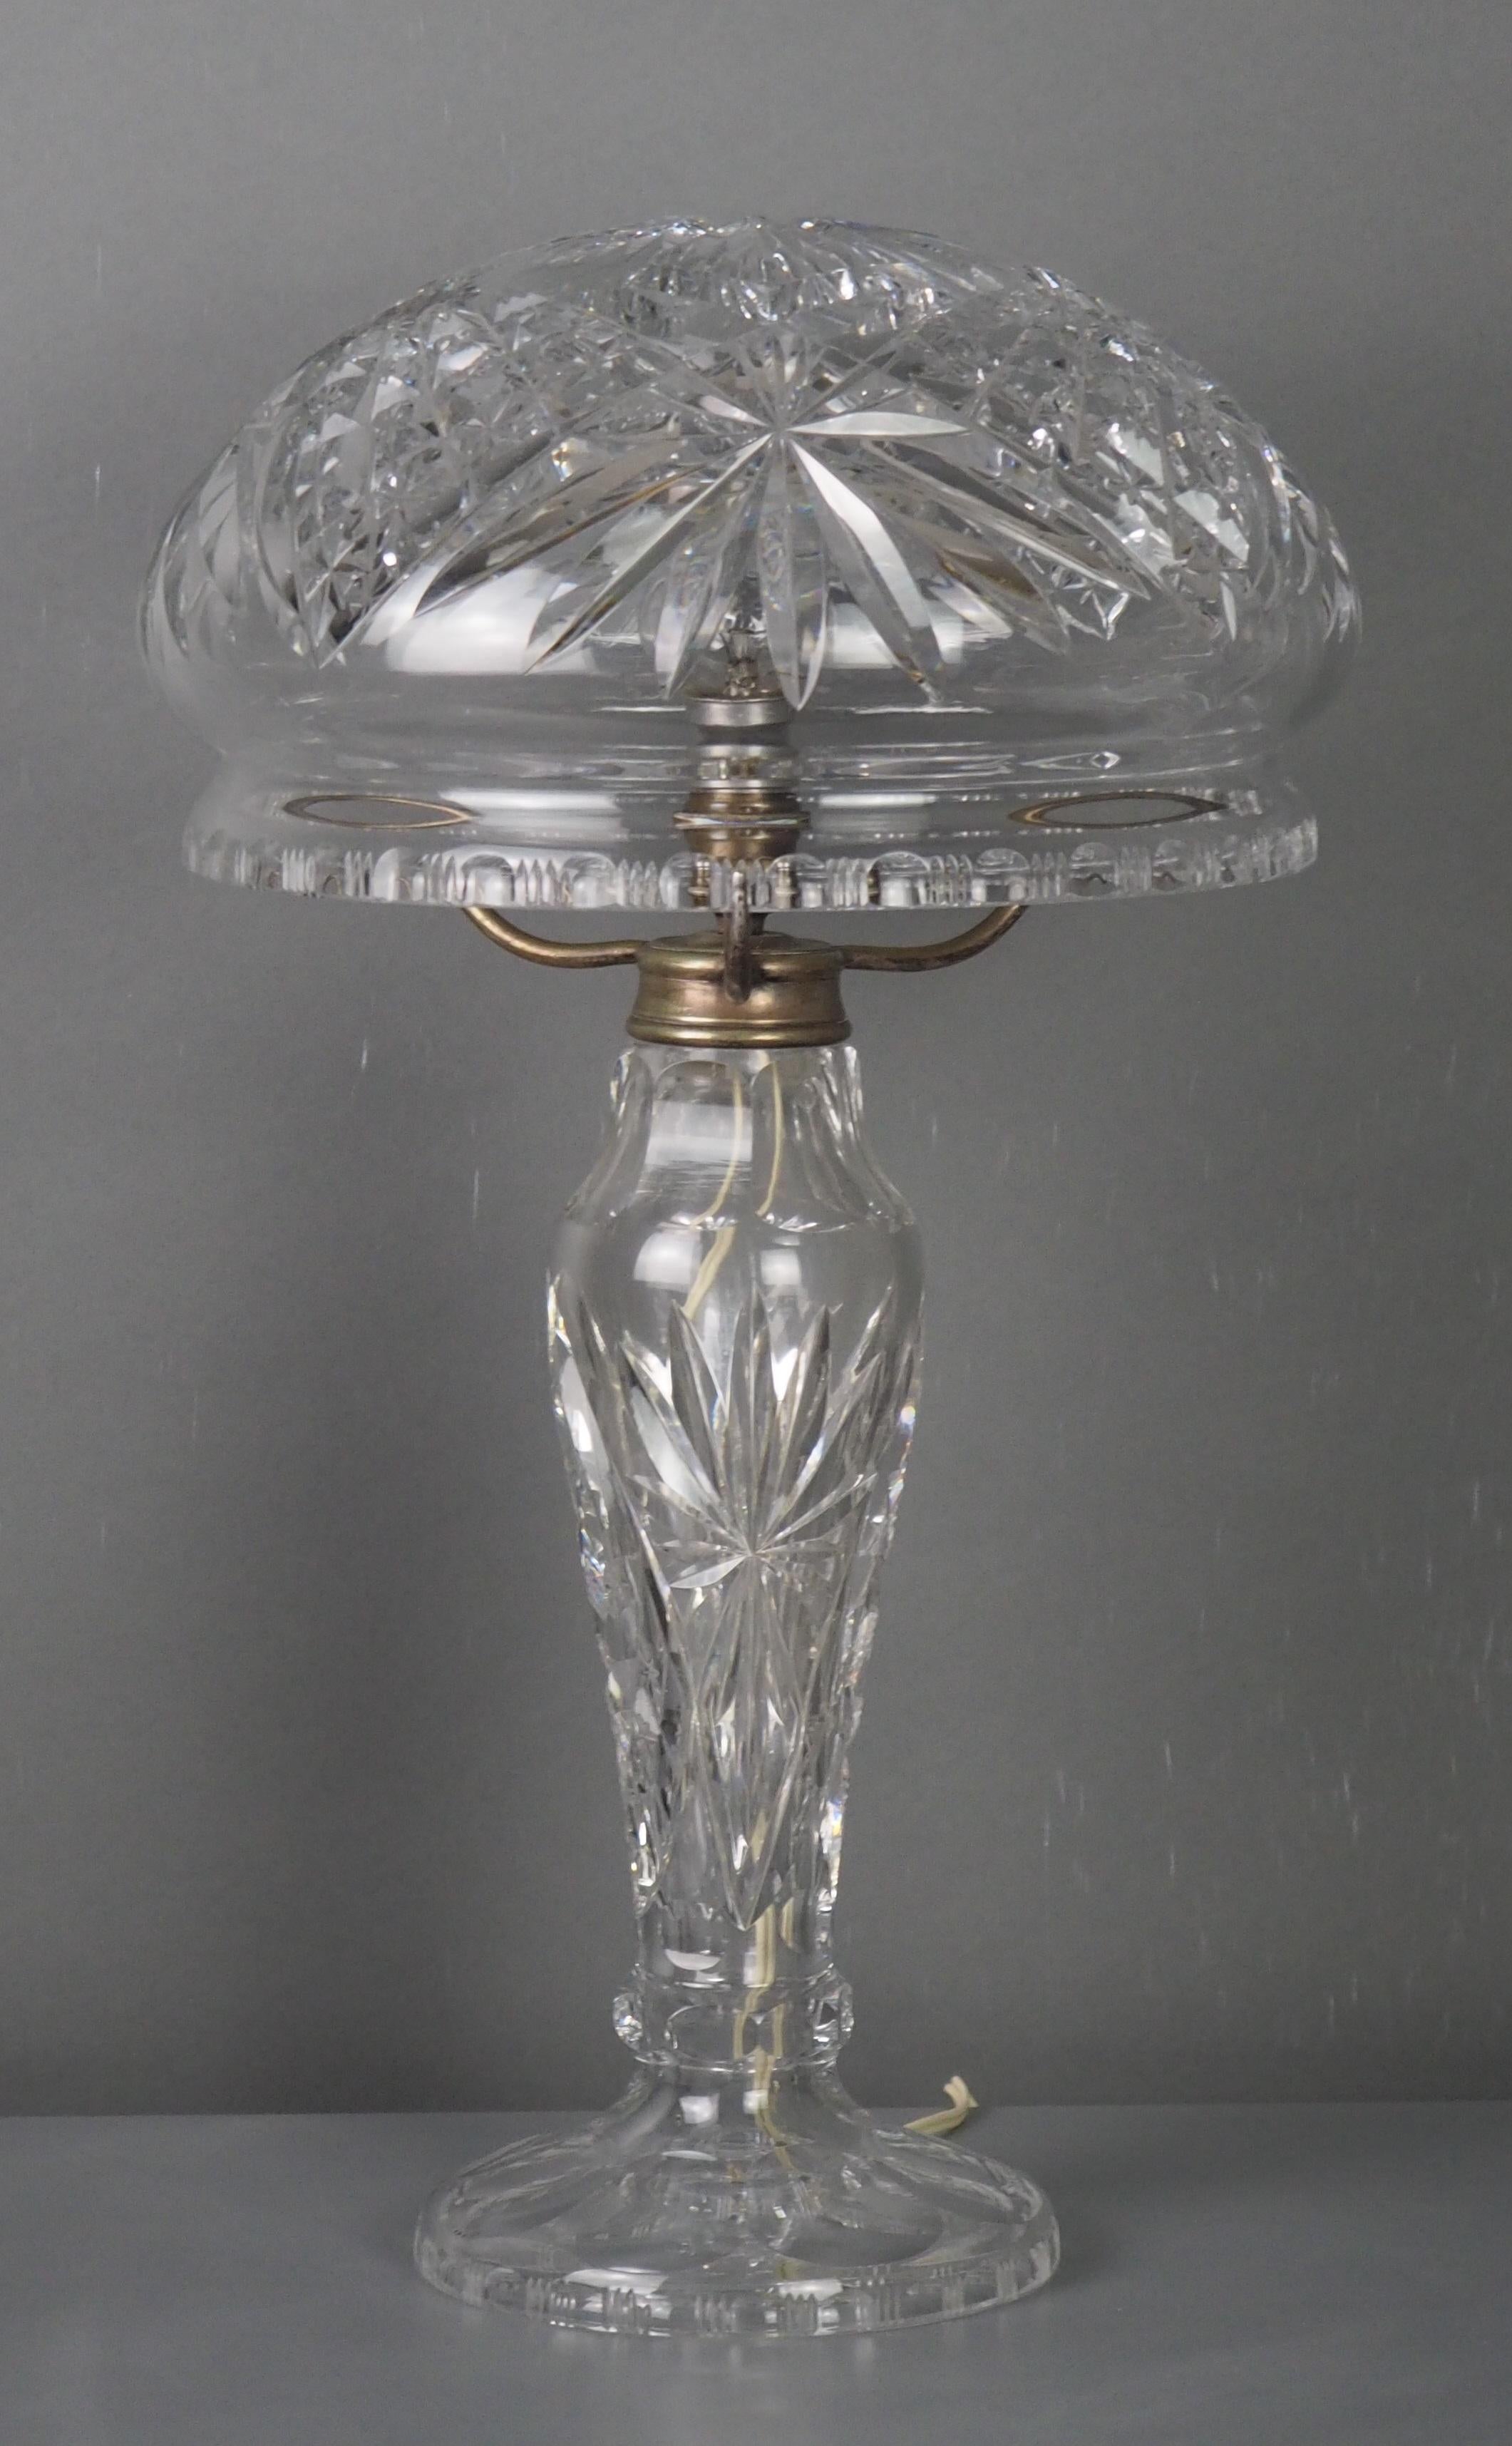 A wonderful Edwardian period cut crystal mushroom table lamp with original shade and Ediwsan lamp socket, UK, circa 1900-1910.
This lamp is made of superb quality cut crystal with silver plated mounts.
Socket: 1 x b22 
Newly wired.

